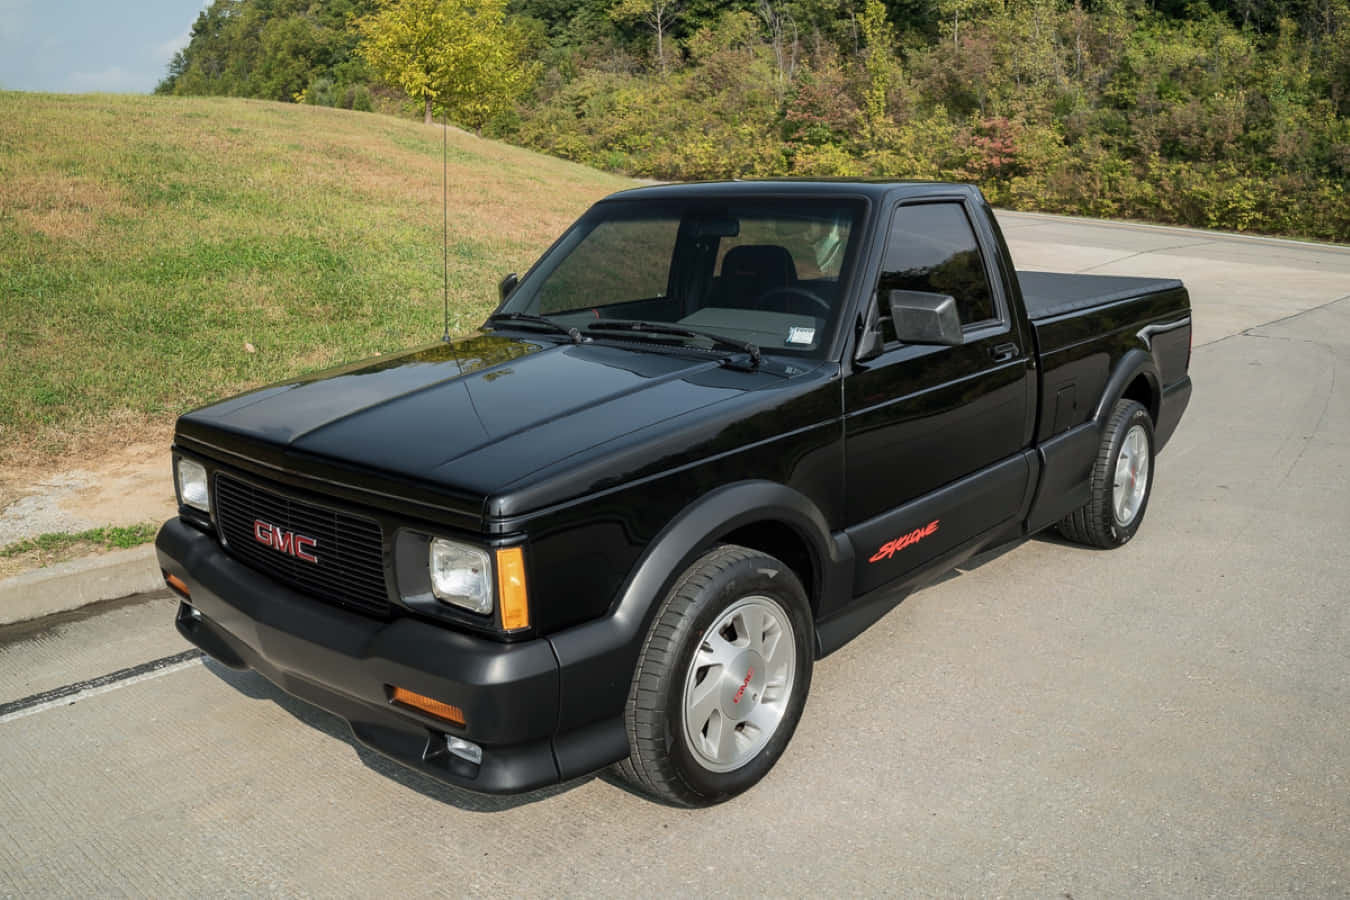 GMC Syclone In Action Wallpaper